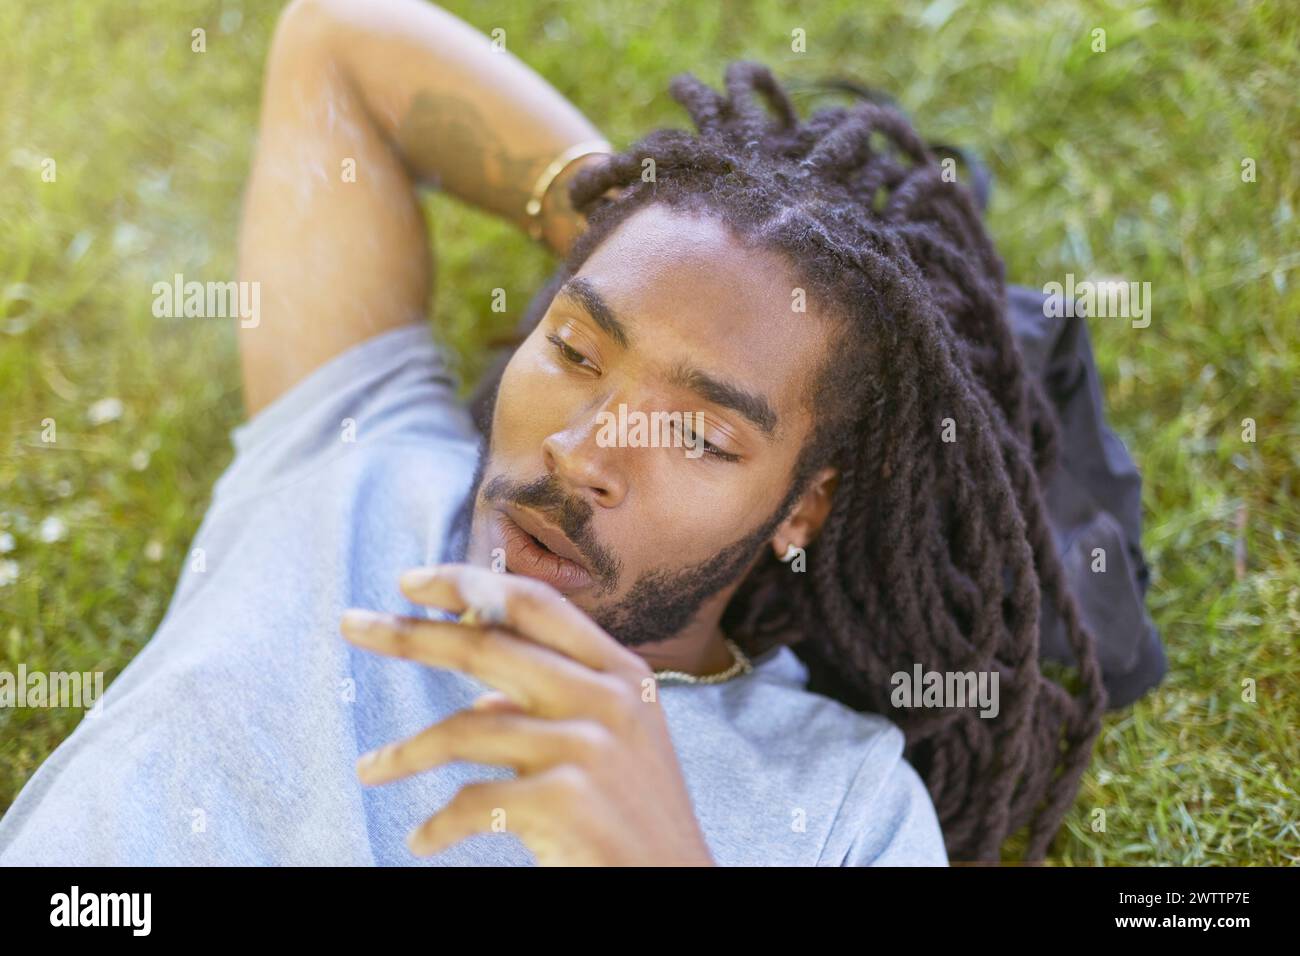 Man relaxing in grass with a thoughtful expression. Stock Photo